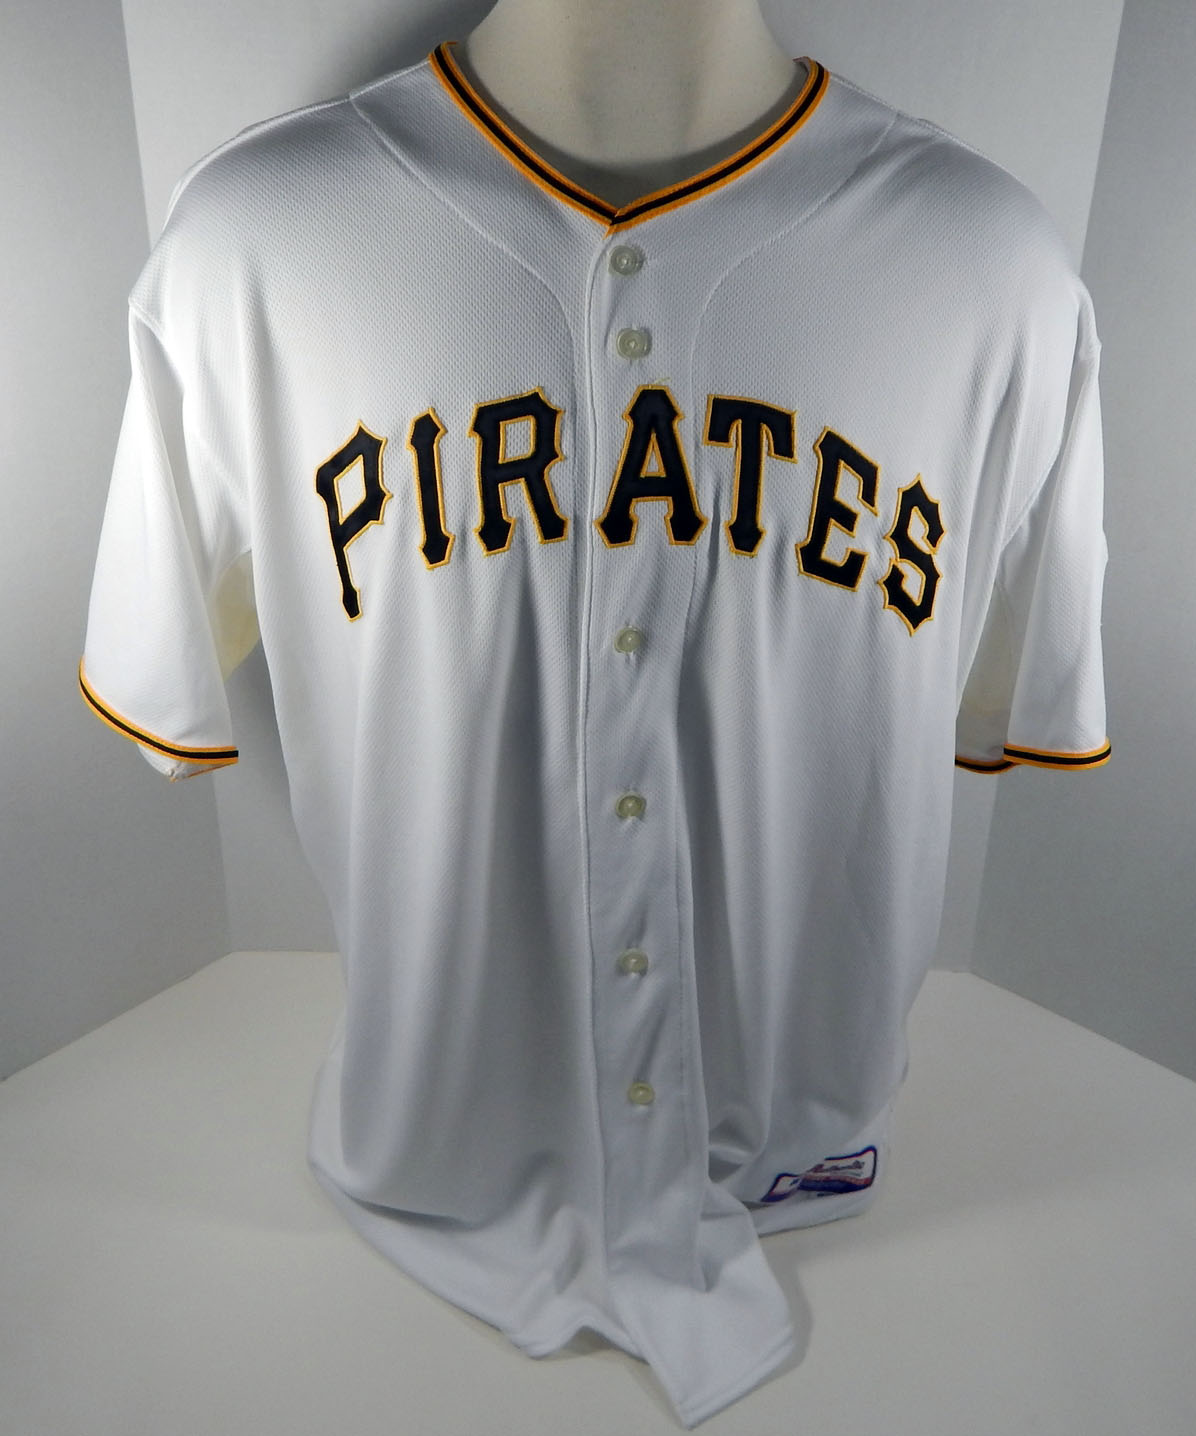 Pittsburgh Pirates Blank Game Issued White Jersey 54 PITT32745